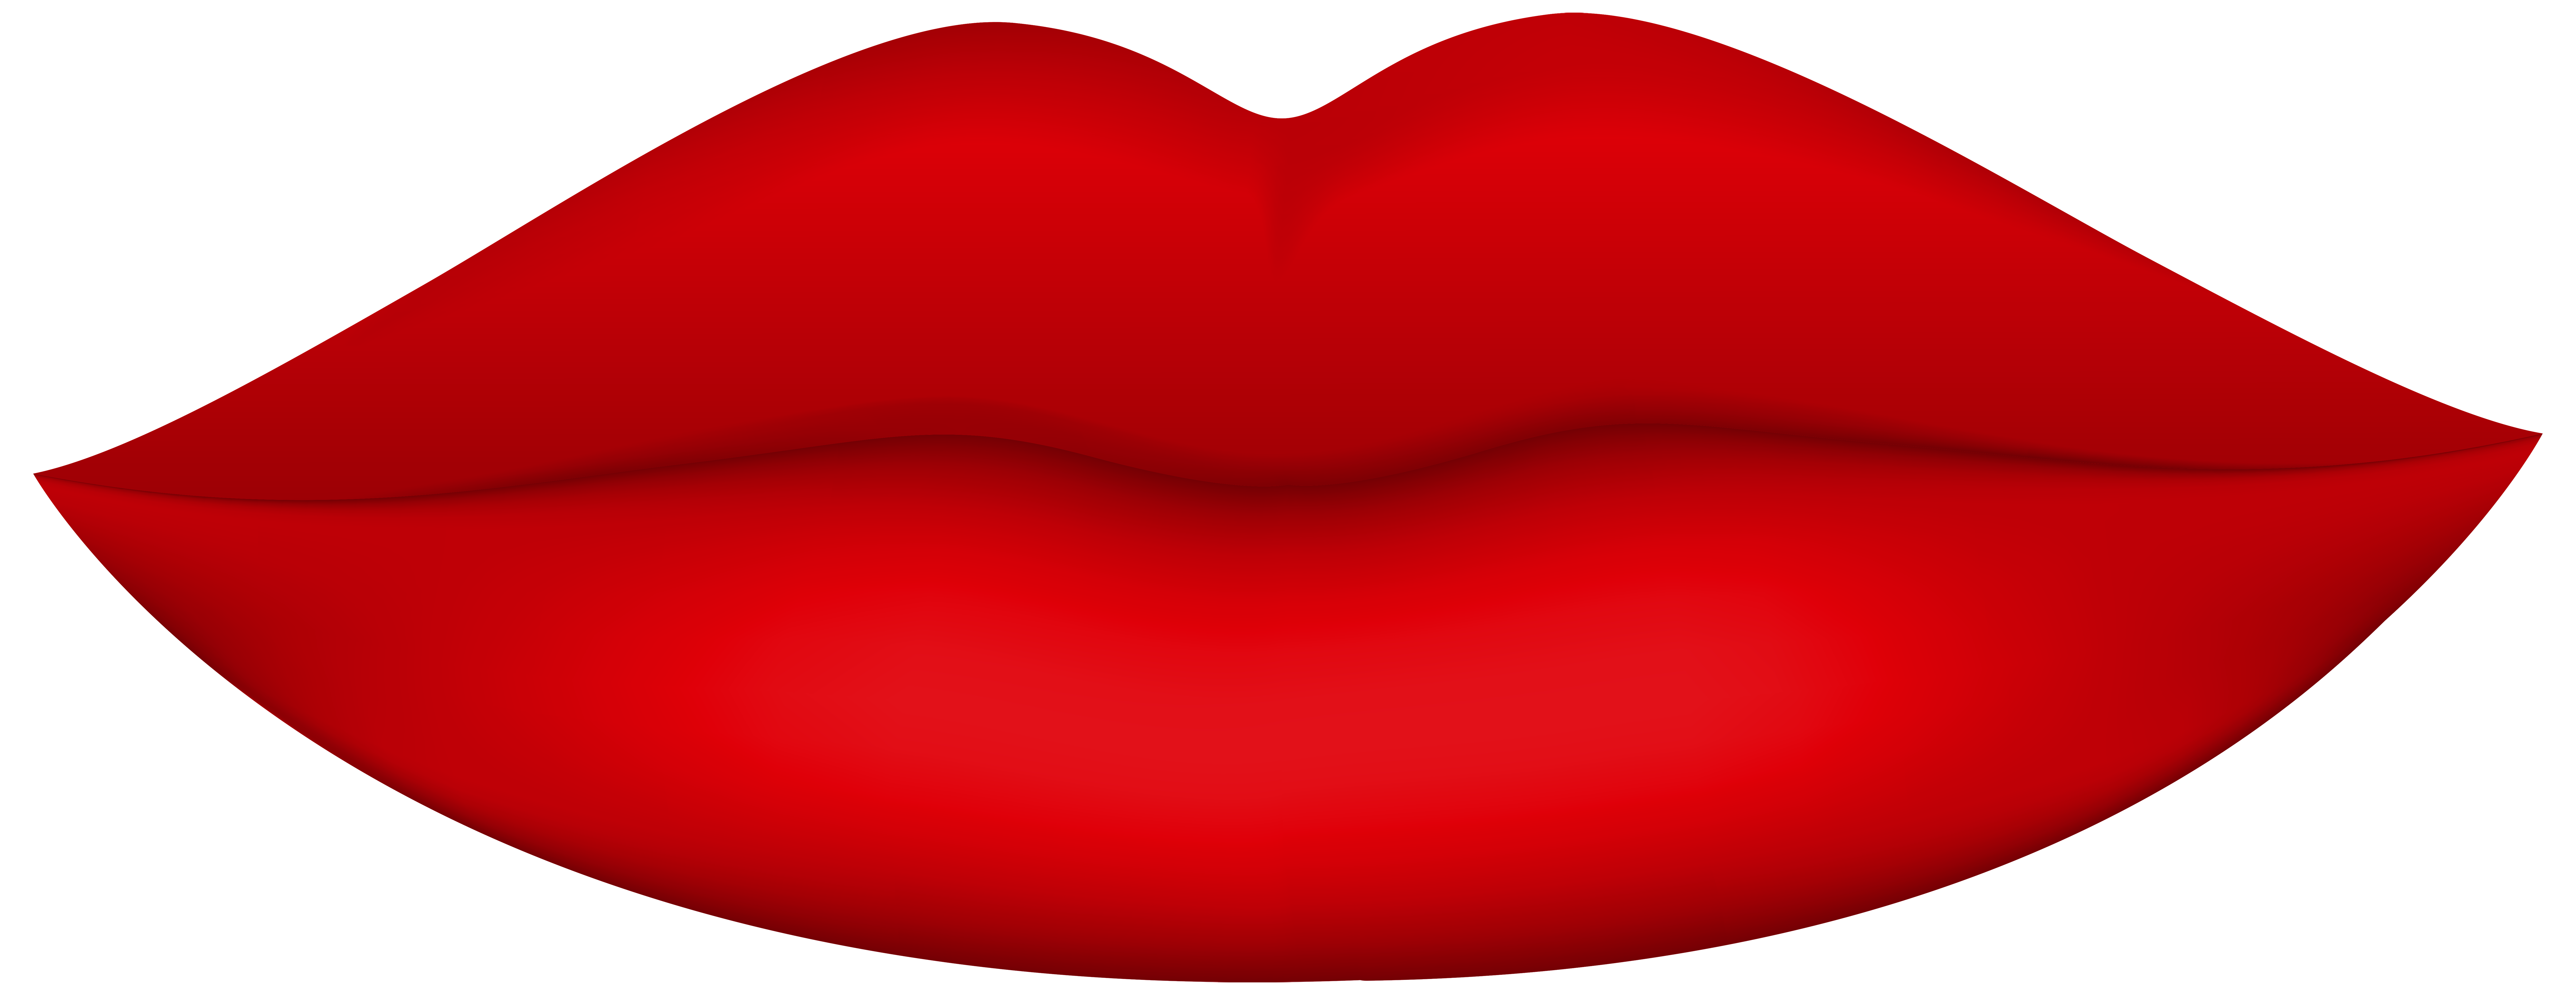 Lips on fire clipart